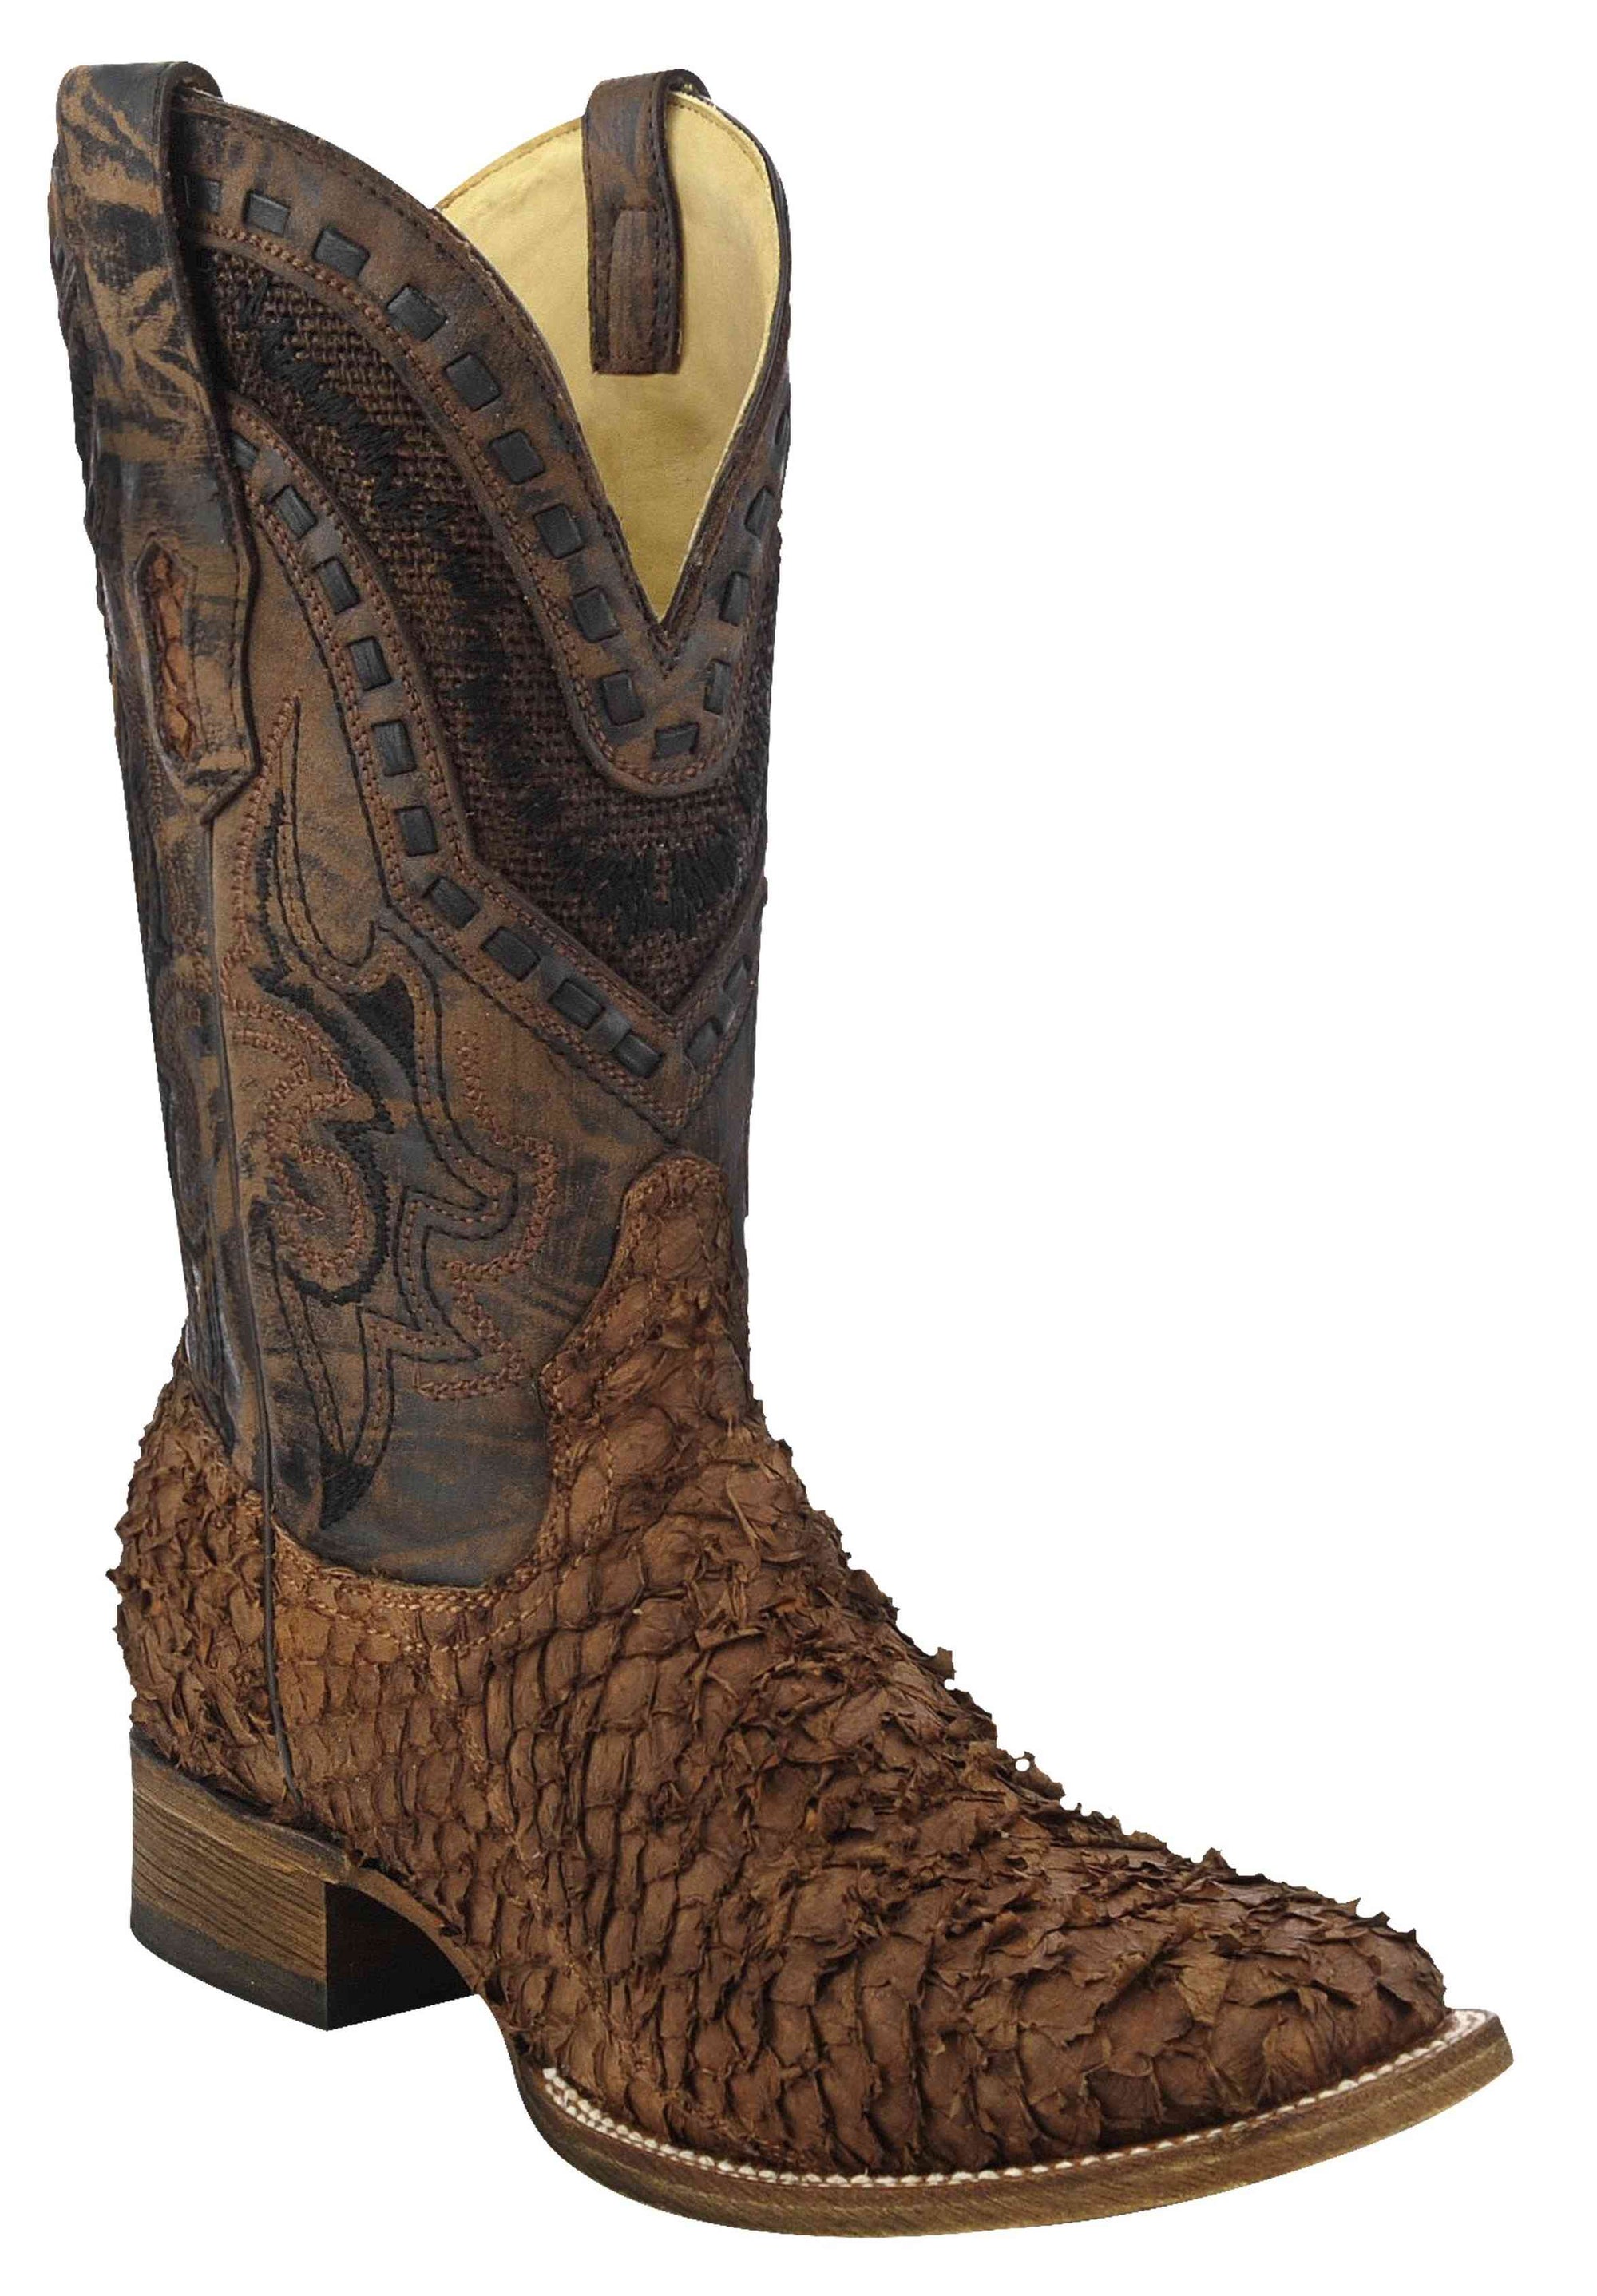 Corral Boots Corral Men's Gnarly Fish Square Toe Cowboy Boots A3086